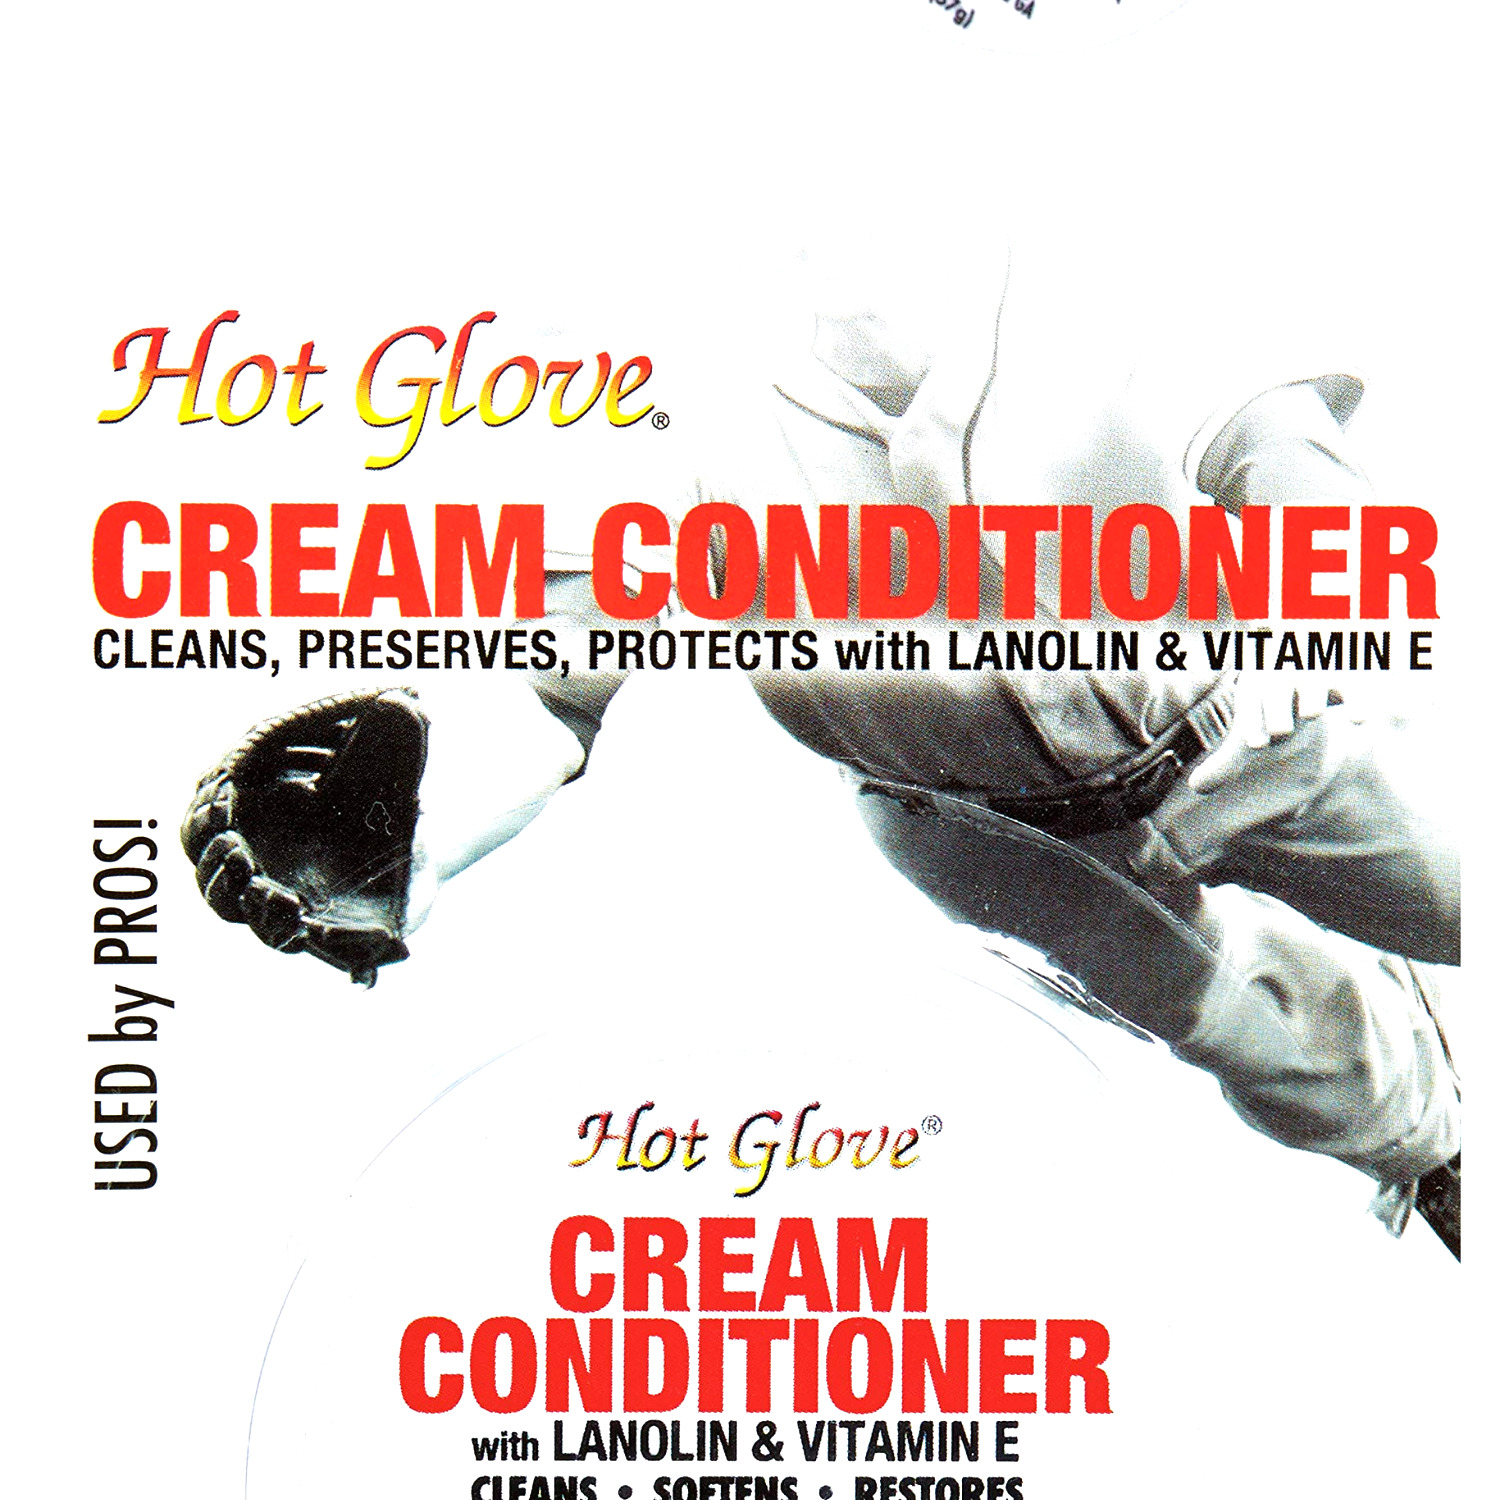 Hot Glove Cream Conditioner For Glove Maitenance And Glove Leather Care, Mult...